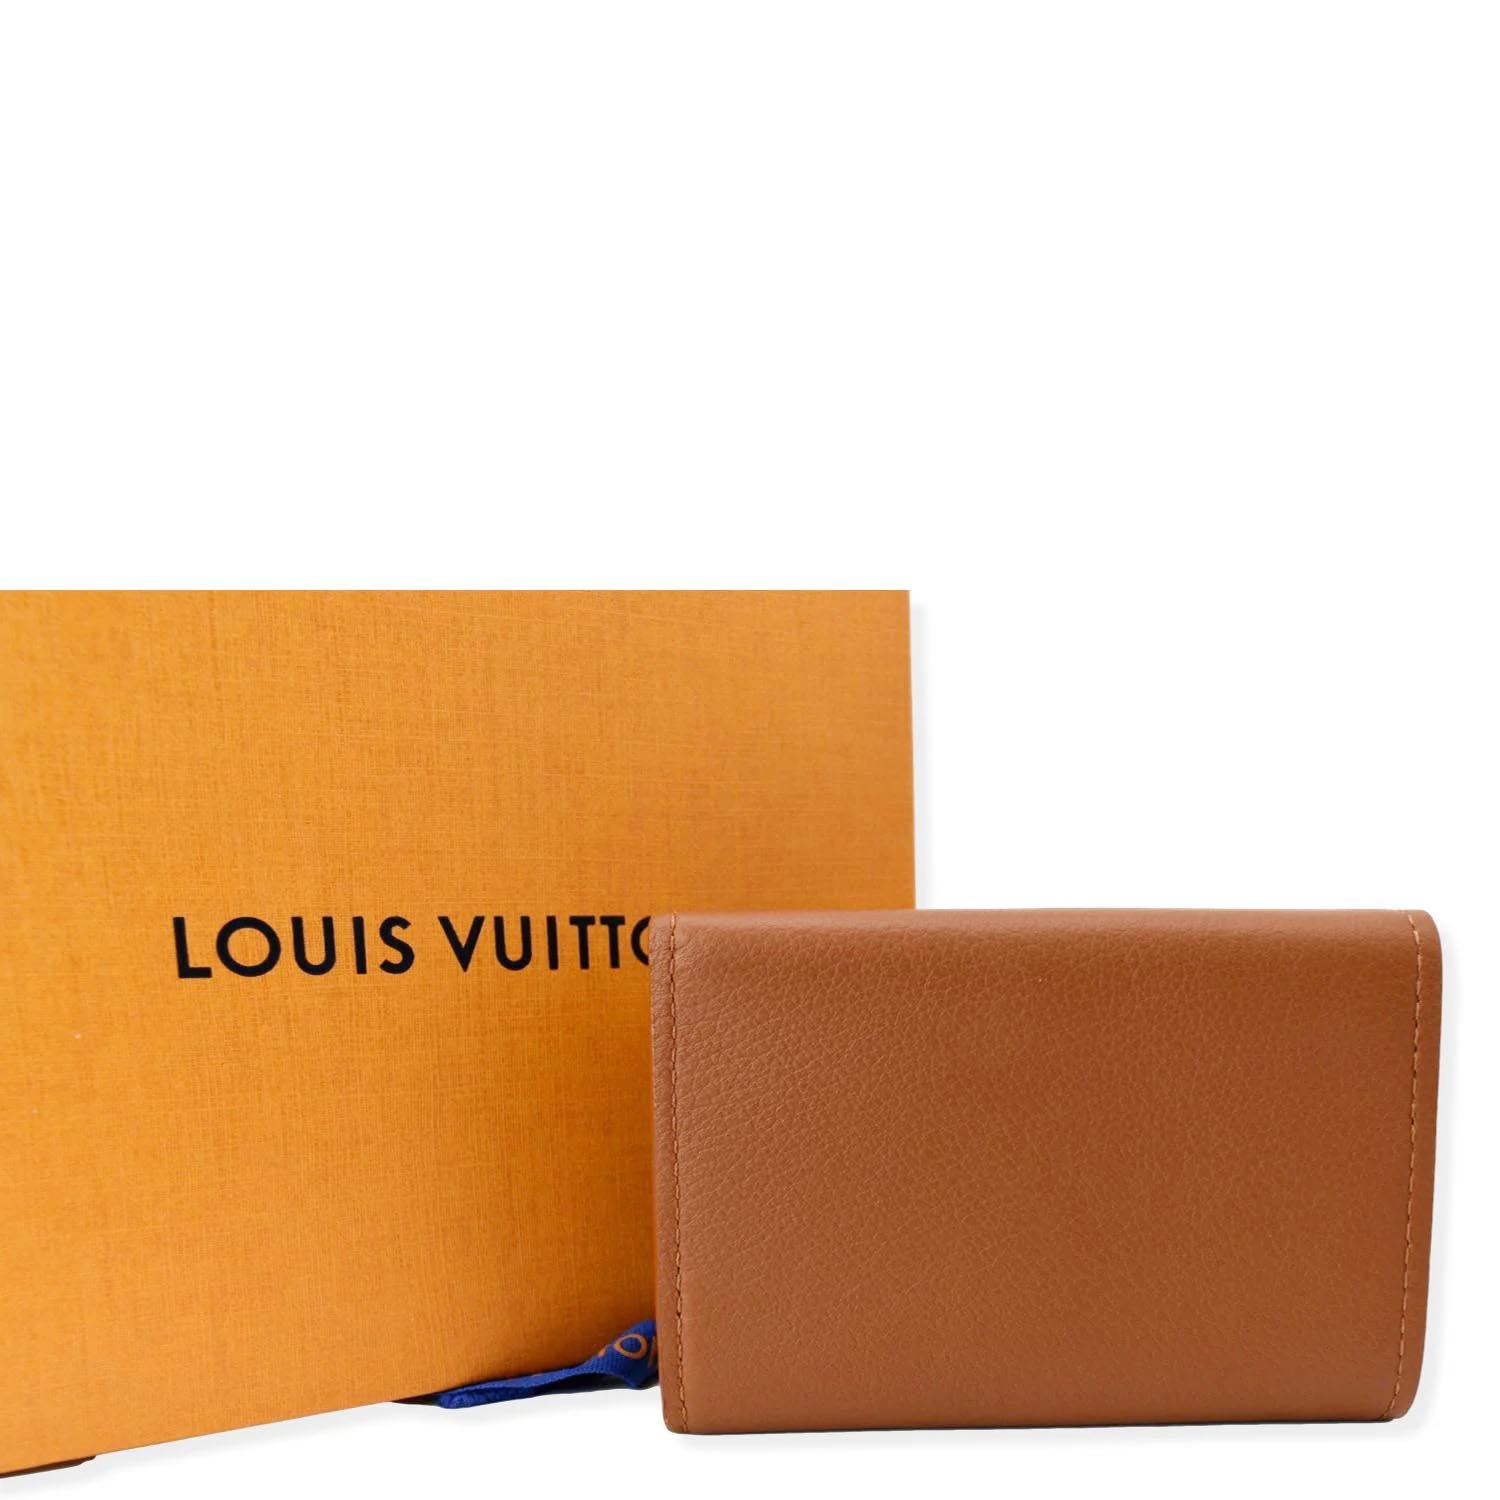 leather card holder louis vuitton